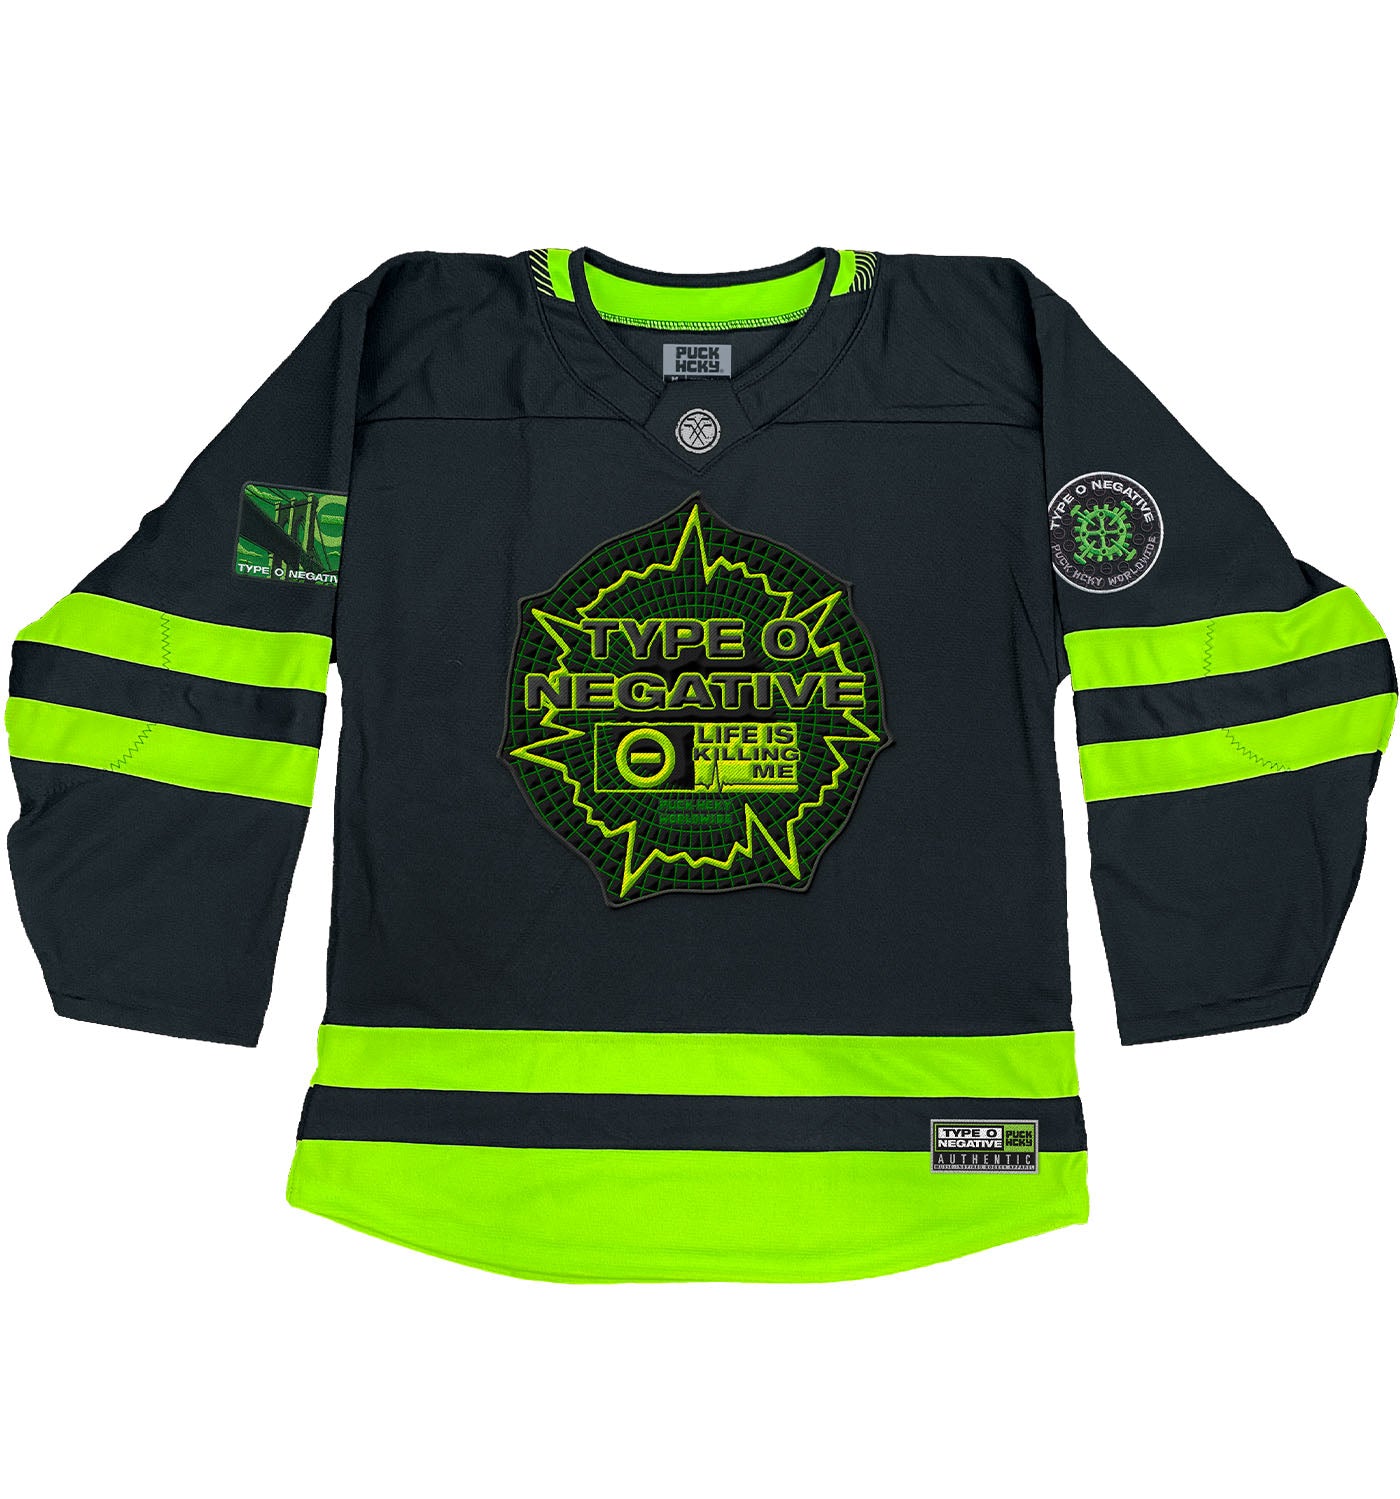 TYPE O NEGATIVE 'LIFE IS KILLING ME' deluxe hockey jersey in black and neon green front view